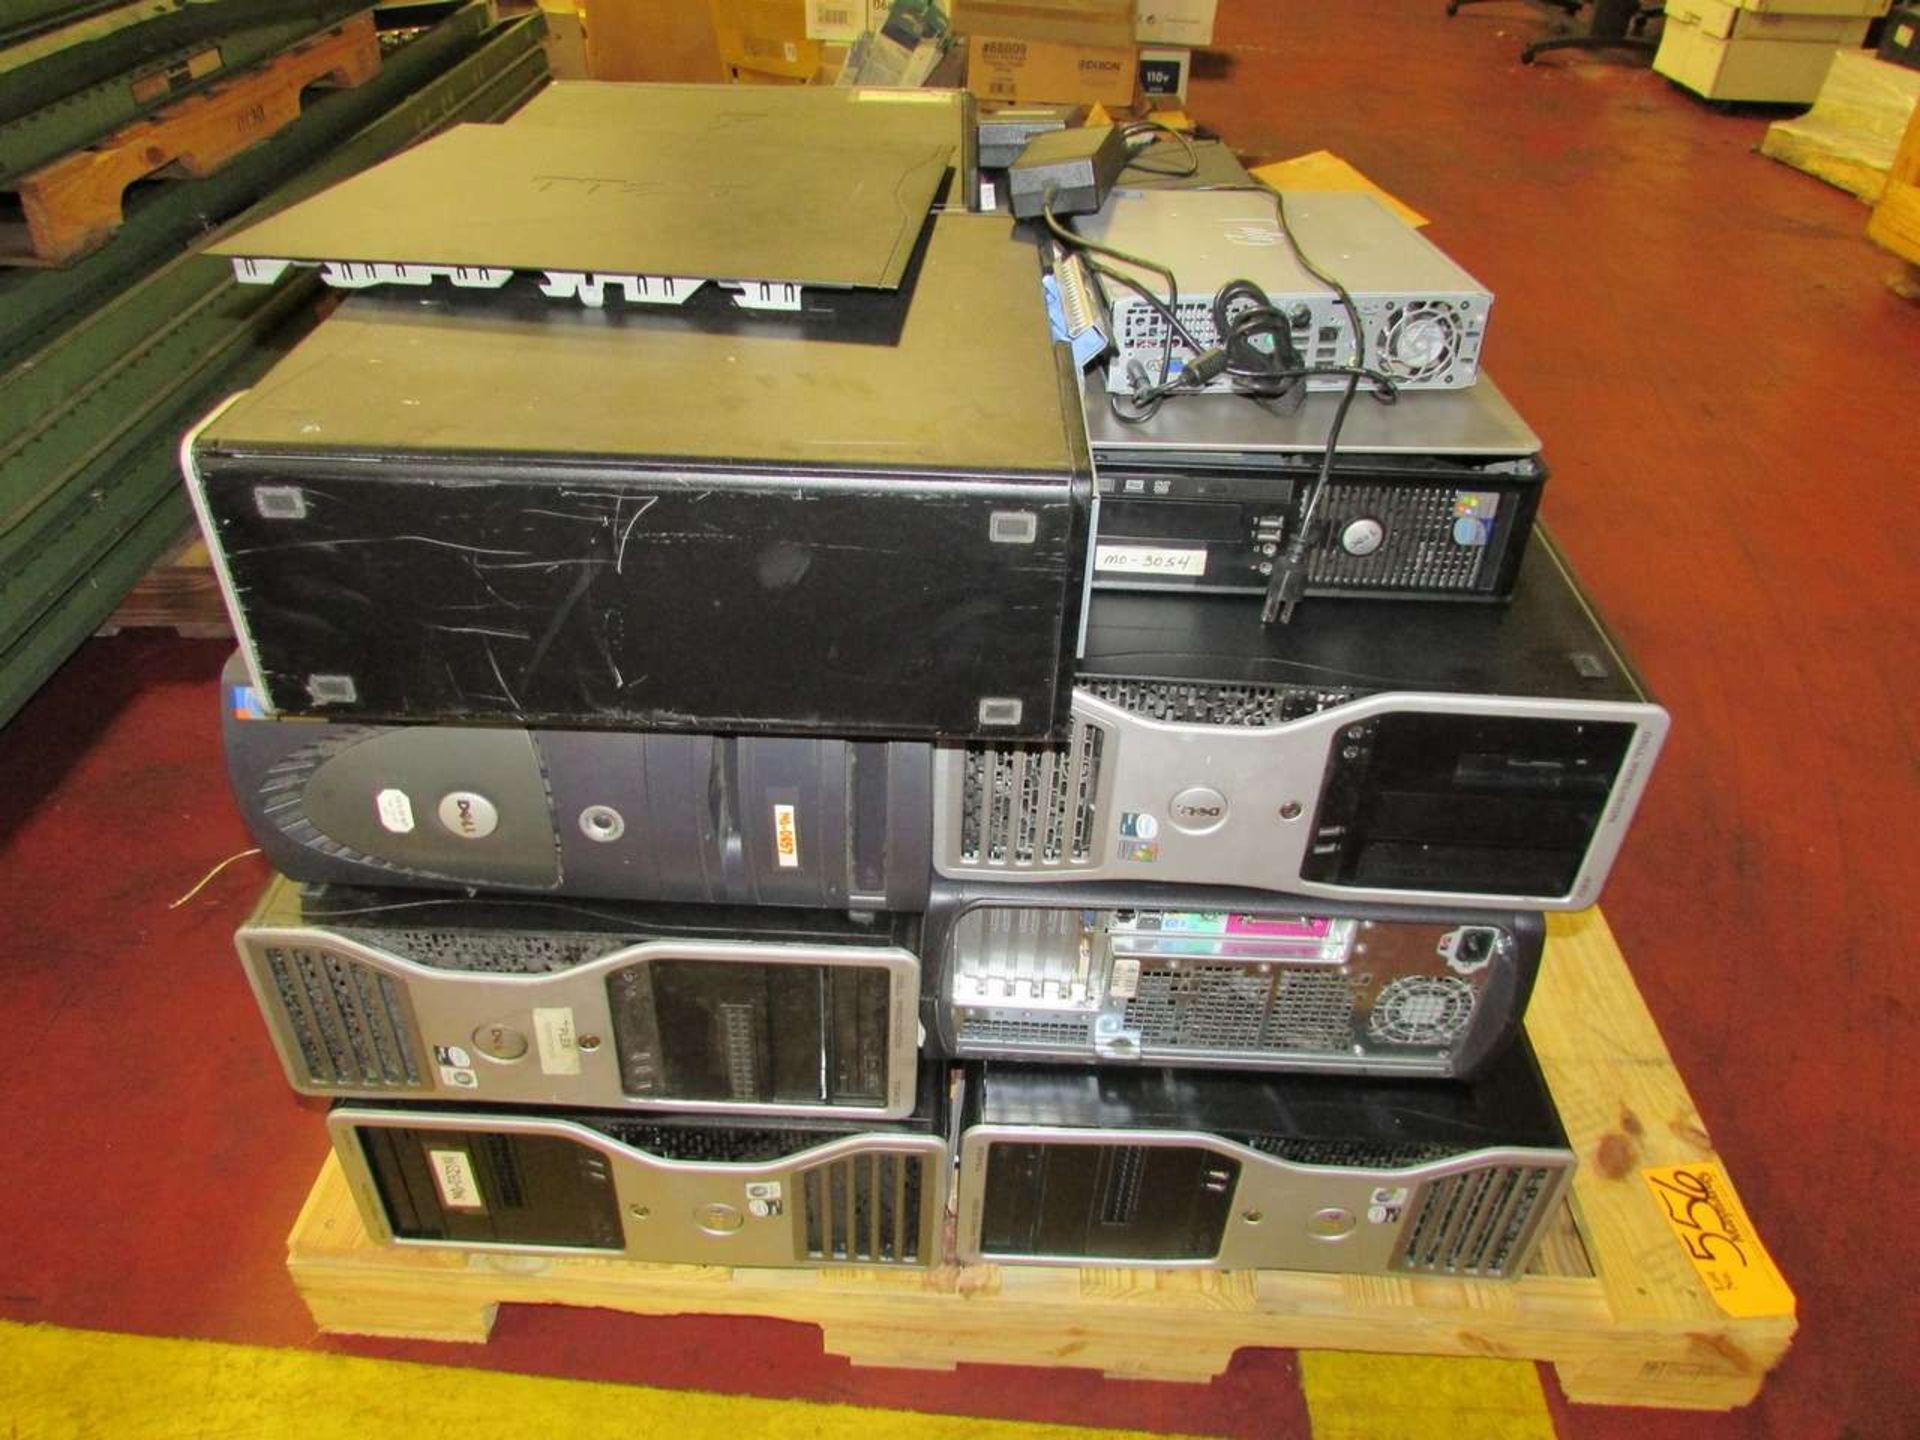 Pallets of Computers, Monitors and Printers